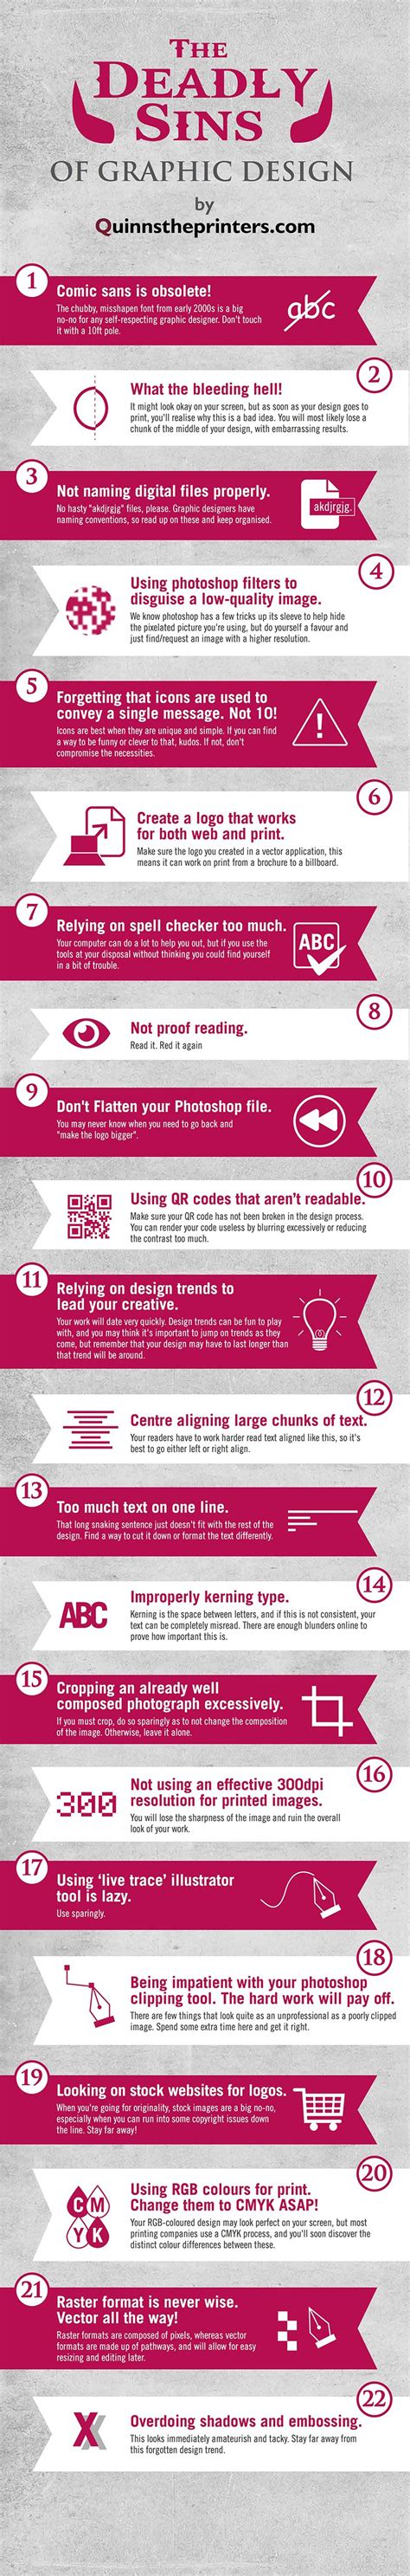 The 22 Deadly Sins Of Graphic Design Your Small Business Must Avoid